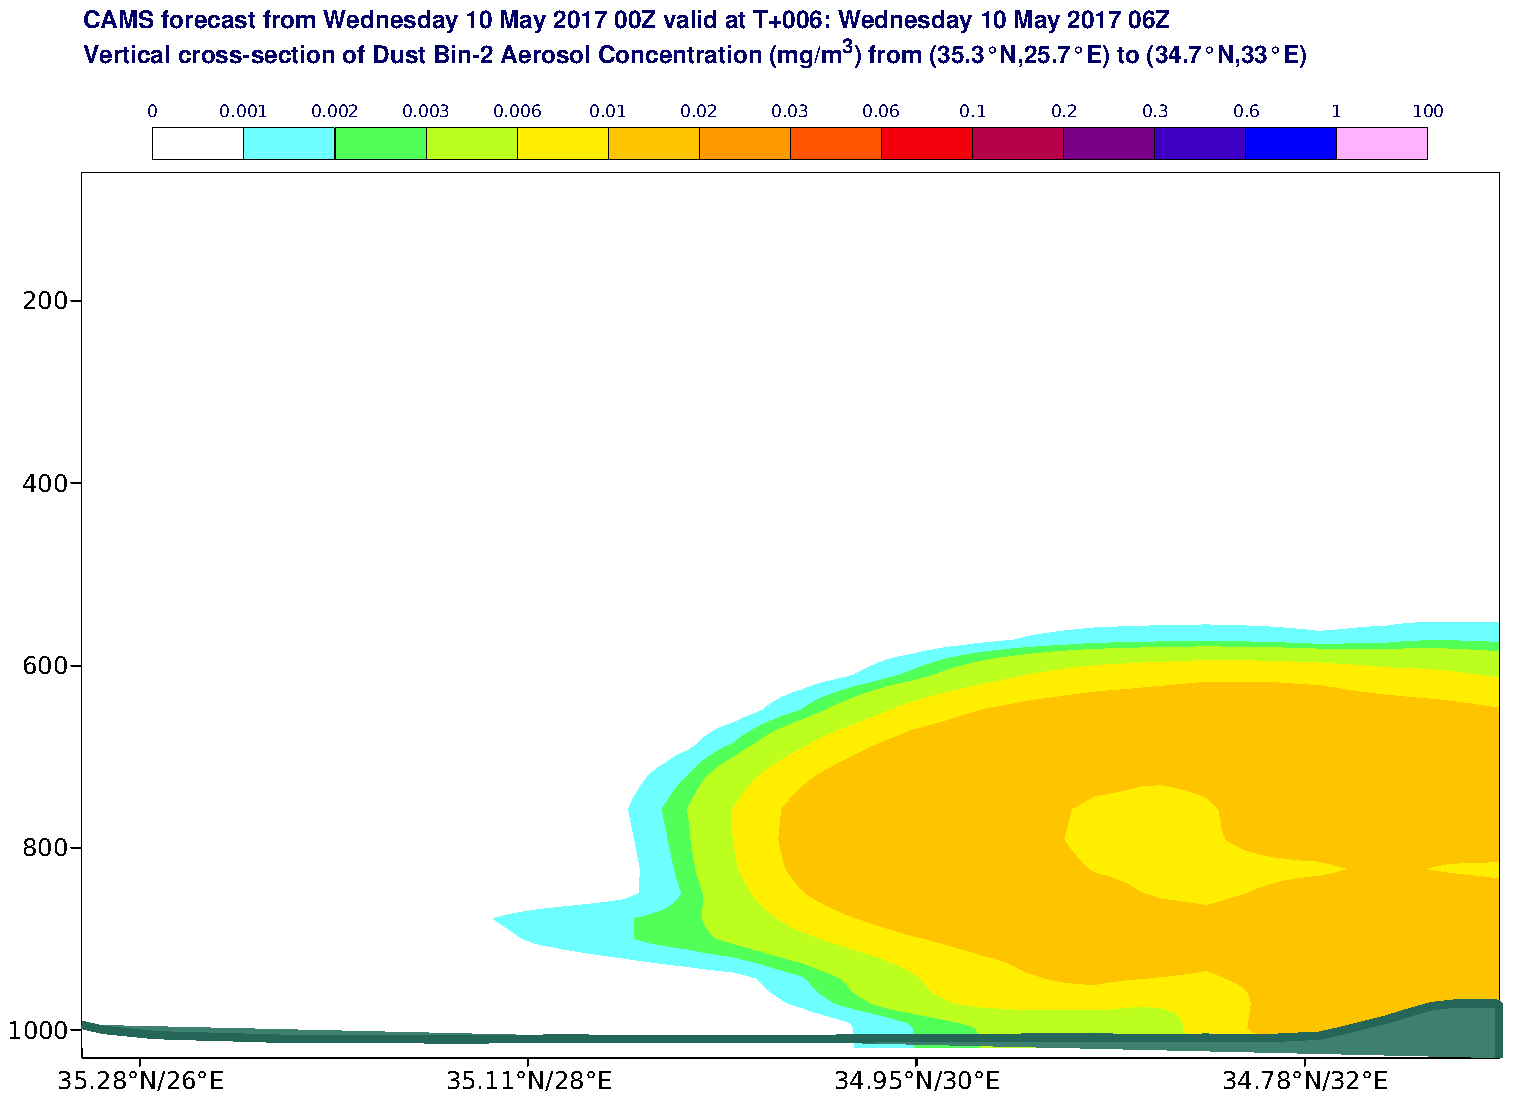 Vertical cross-section of Dust Bin-2 Aerosol Concentration (mg/m3) valid at T6 - 2017-05-10 06:00